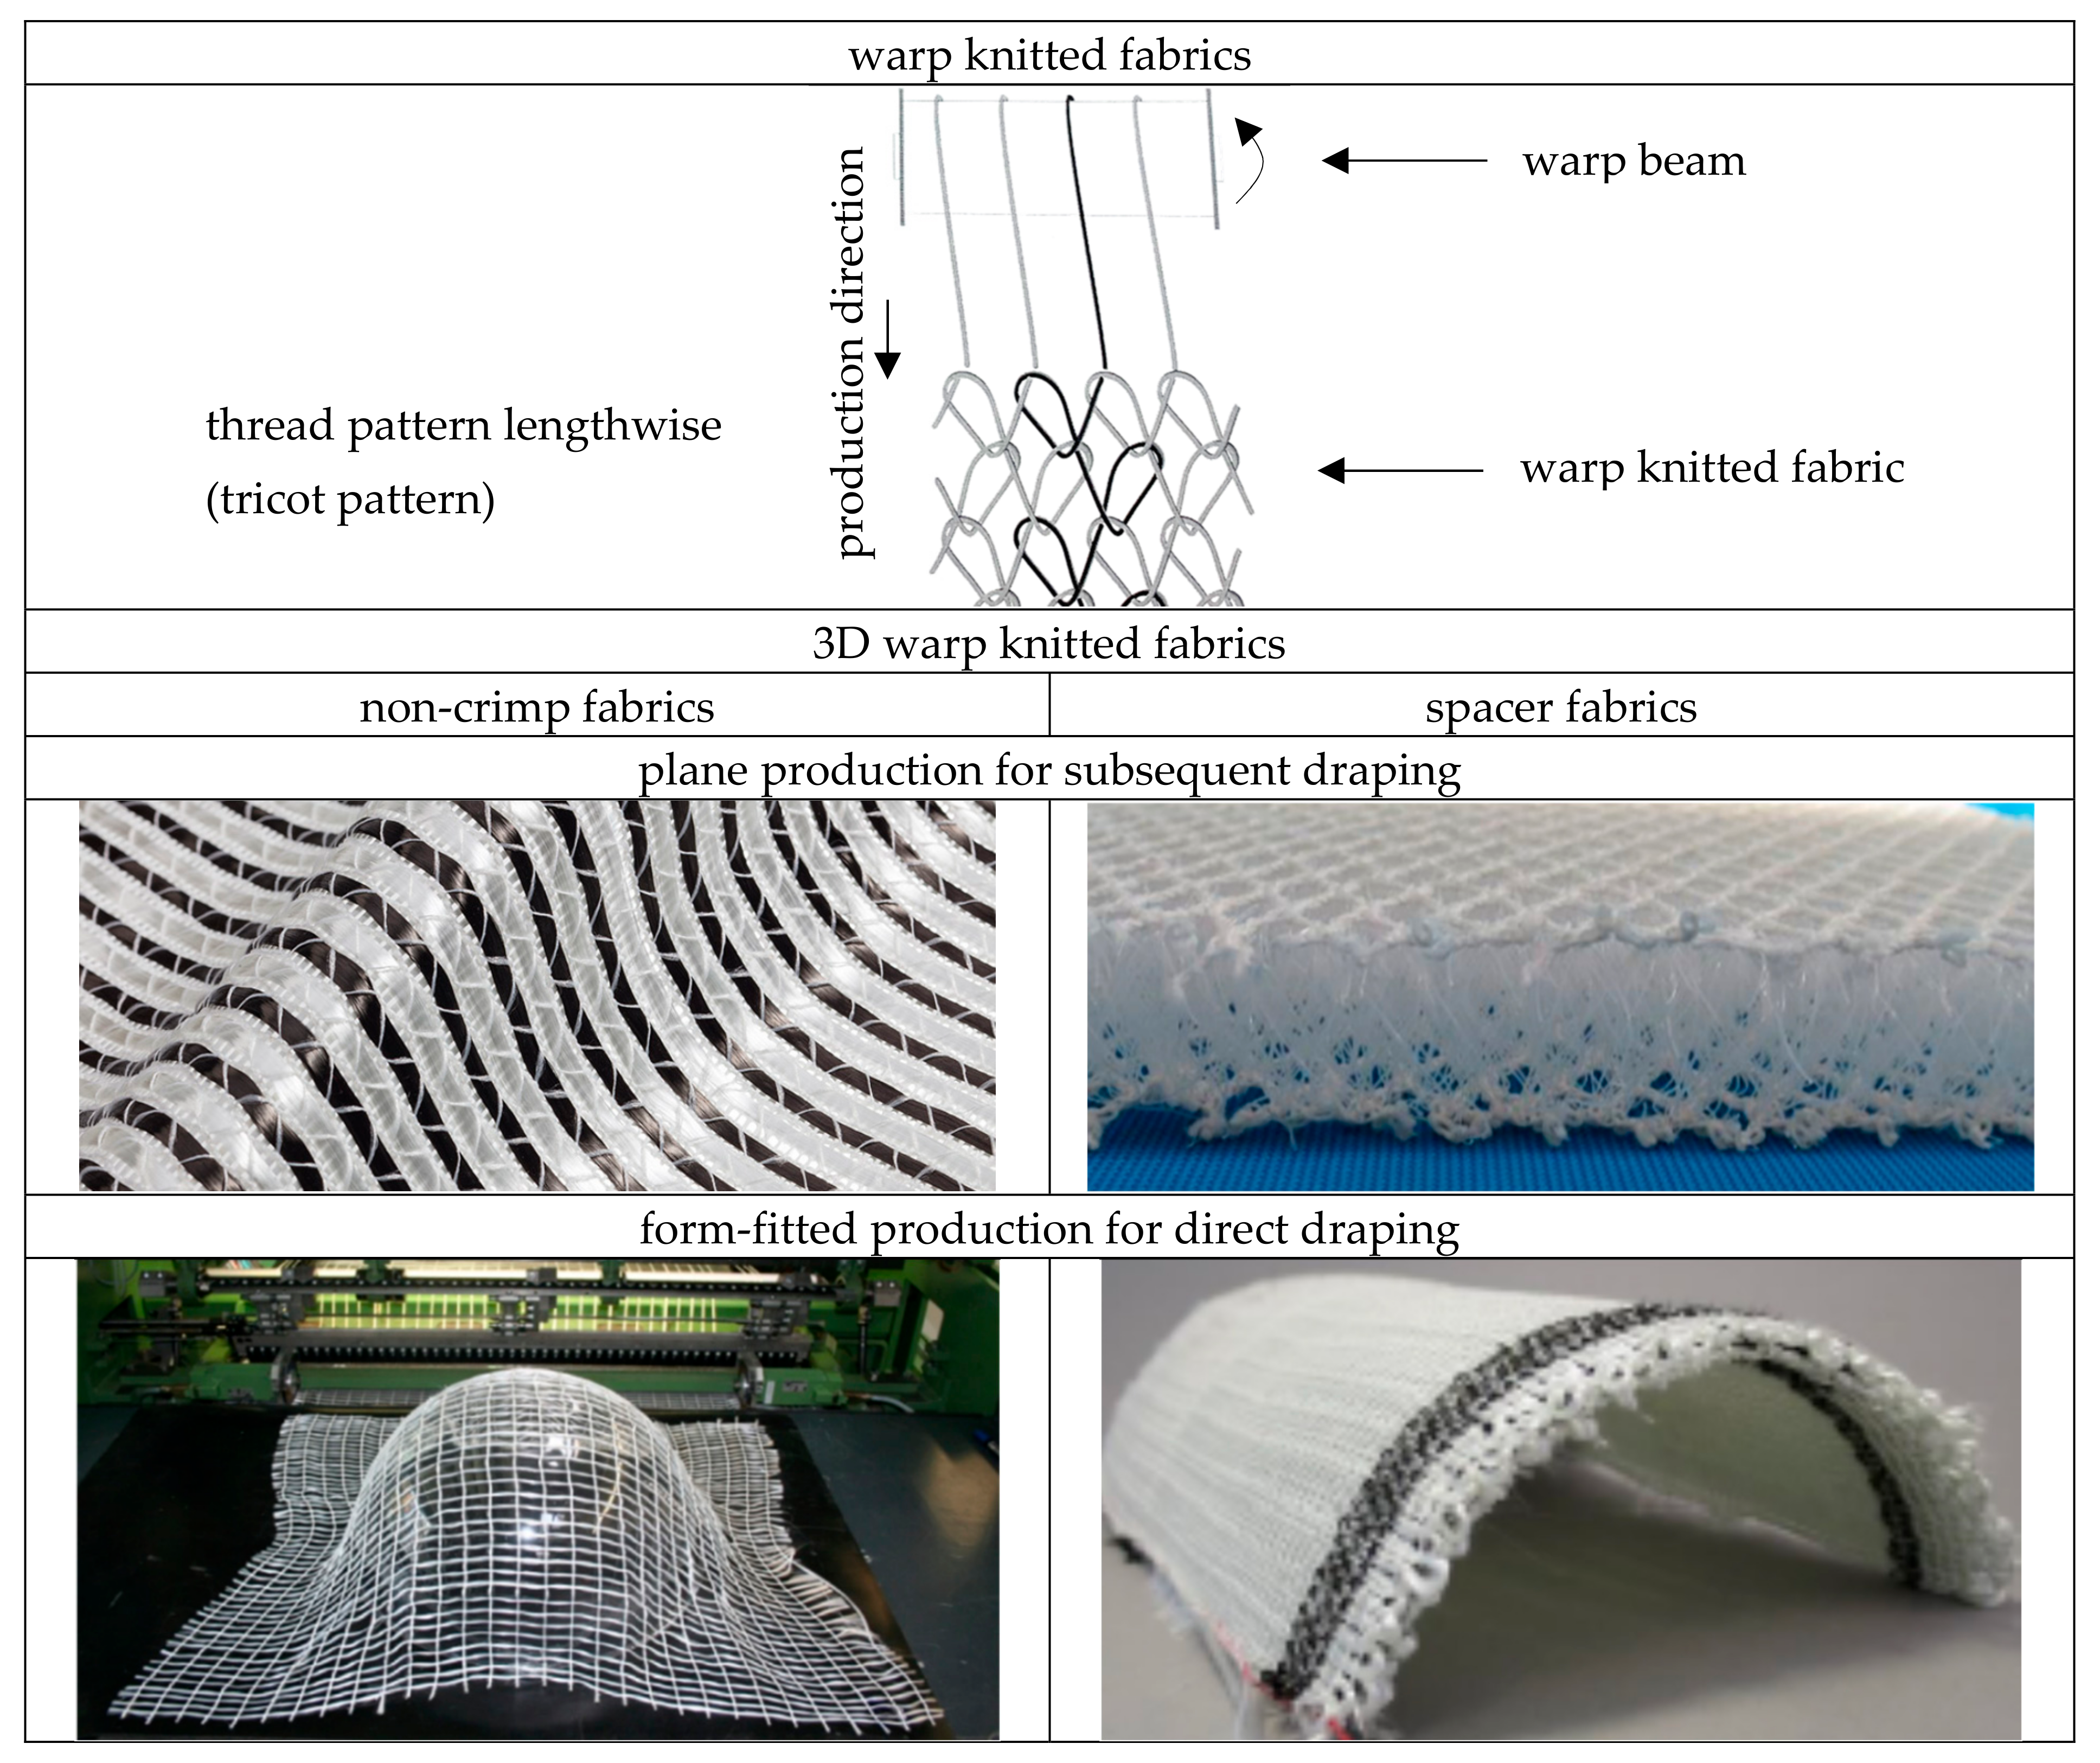 Simple models of warp knitted fabric structures.